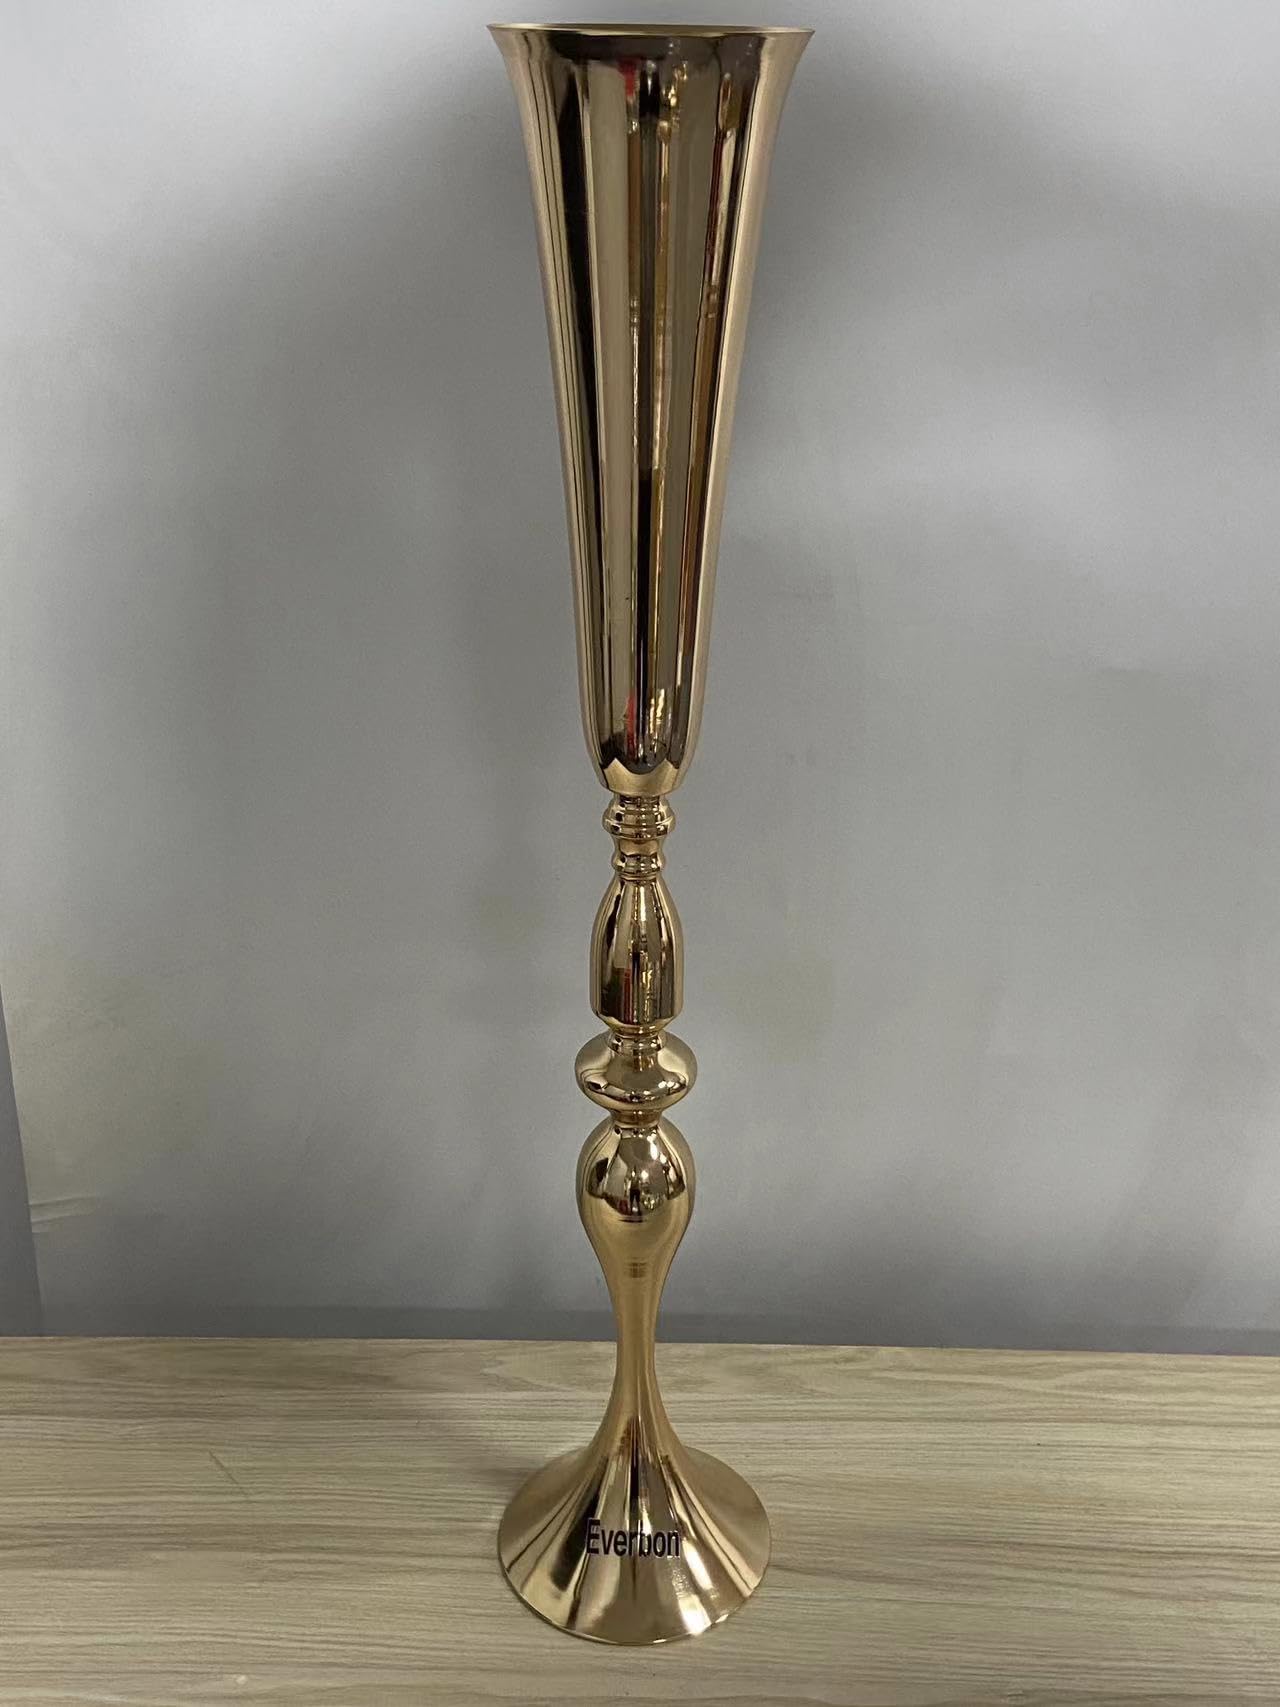 Everbon Gold Metal Trumpet Vase Decorative Centerpieces, 34.6 Inches Tall, 10 Pieces